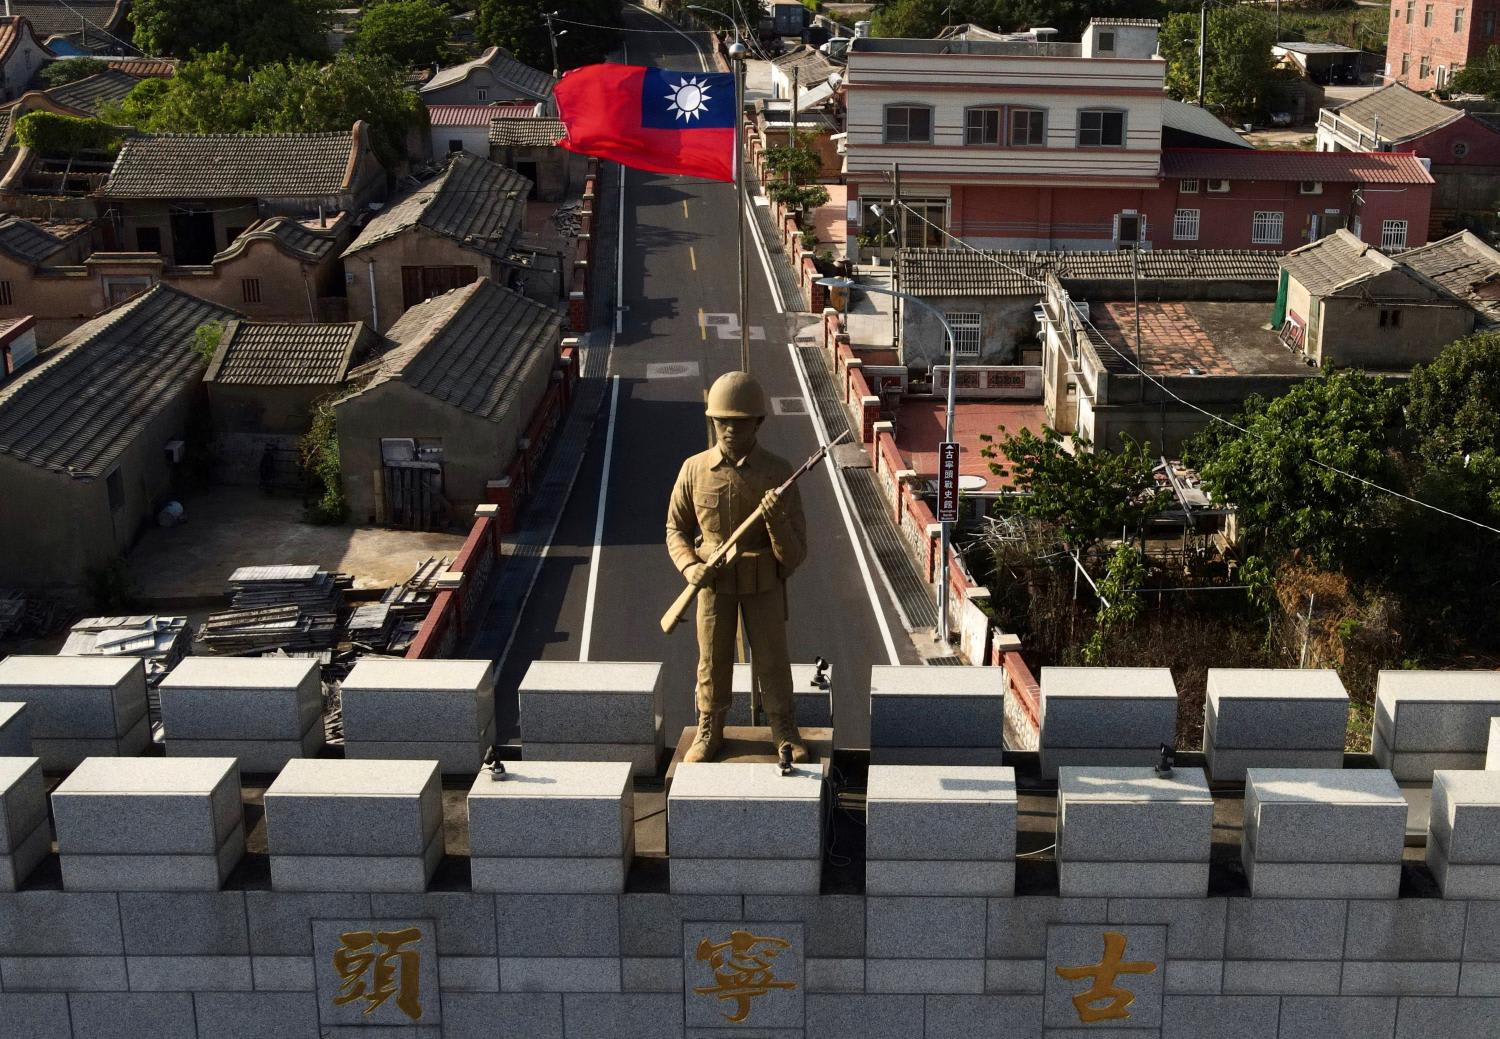 A military statue and Taiwanese flag on top of an arch built in remembrance of the Battle of Guningtou in 1949 at Taiwan's Kinmen islands, which lie just 3.2km from the mainland China coast in the Taiwan Strait.